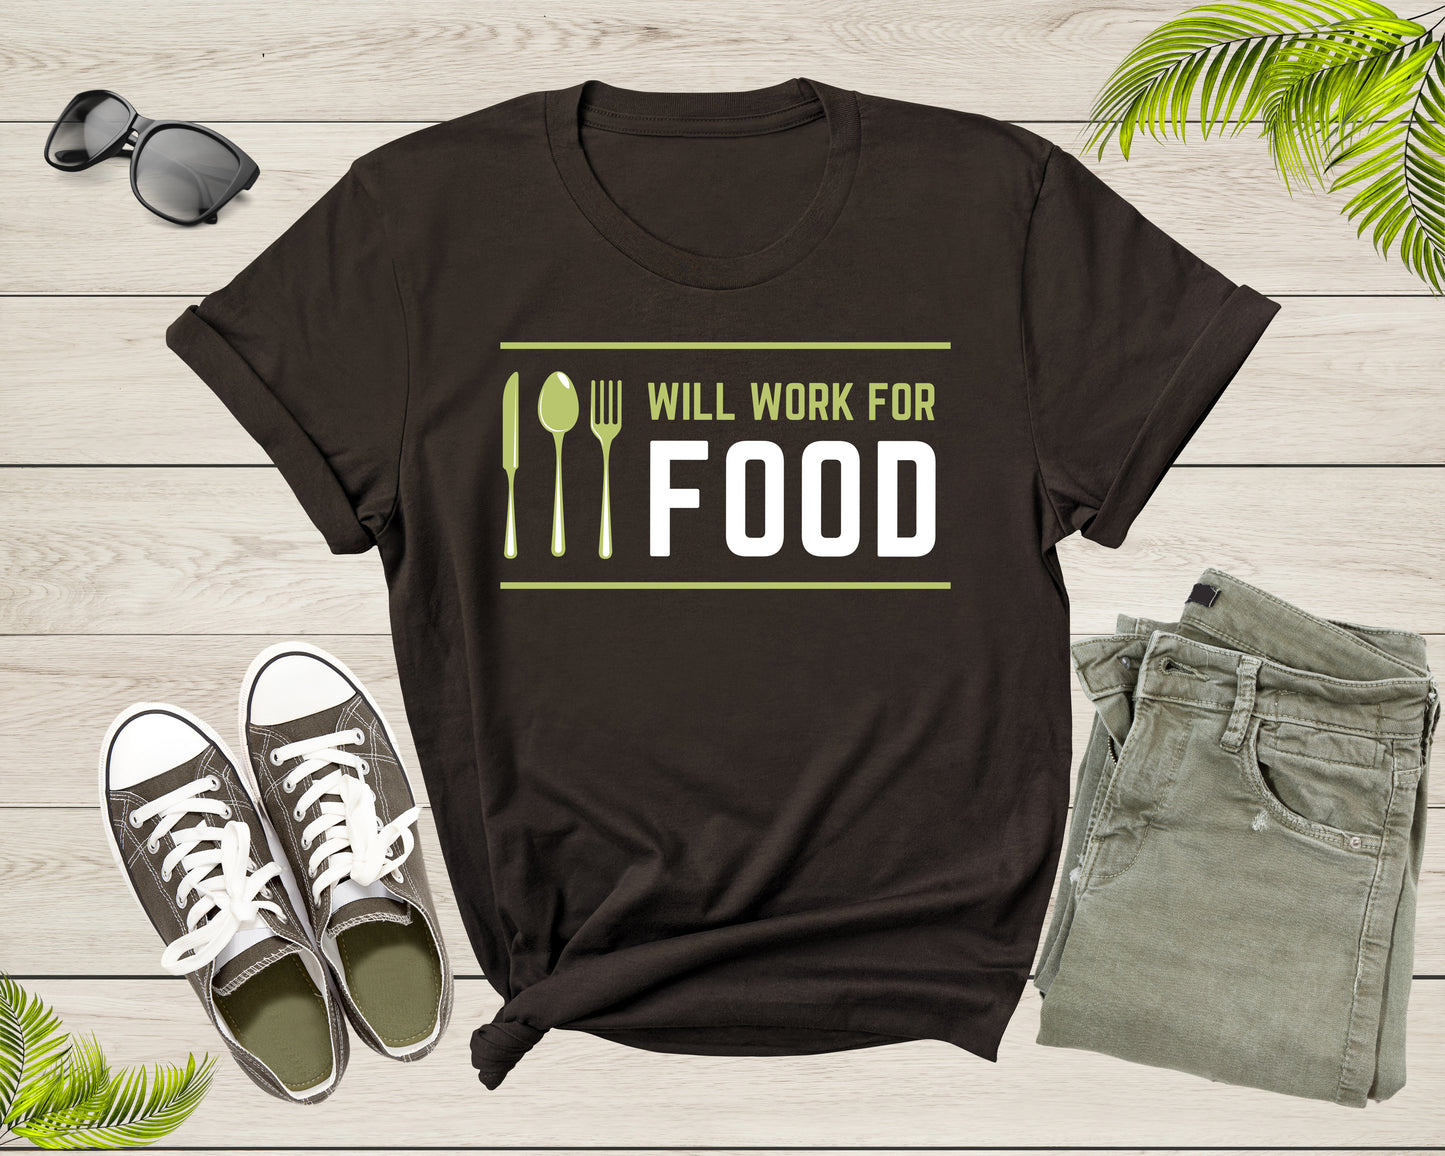 I Will Work for Food Funny Food Lover Sarcastic Hungry T-Shirt Foodie Food Lover Gift T Shirt for Men Women Kids Boys Girls Teens Tshirt